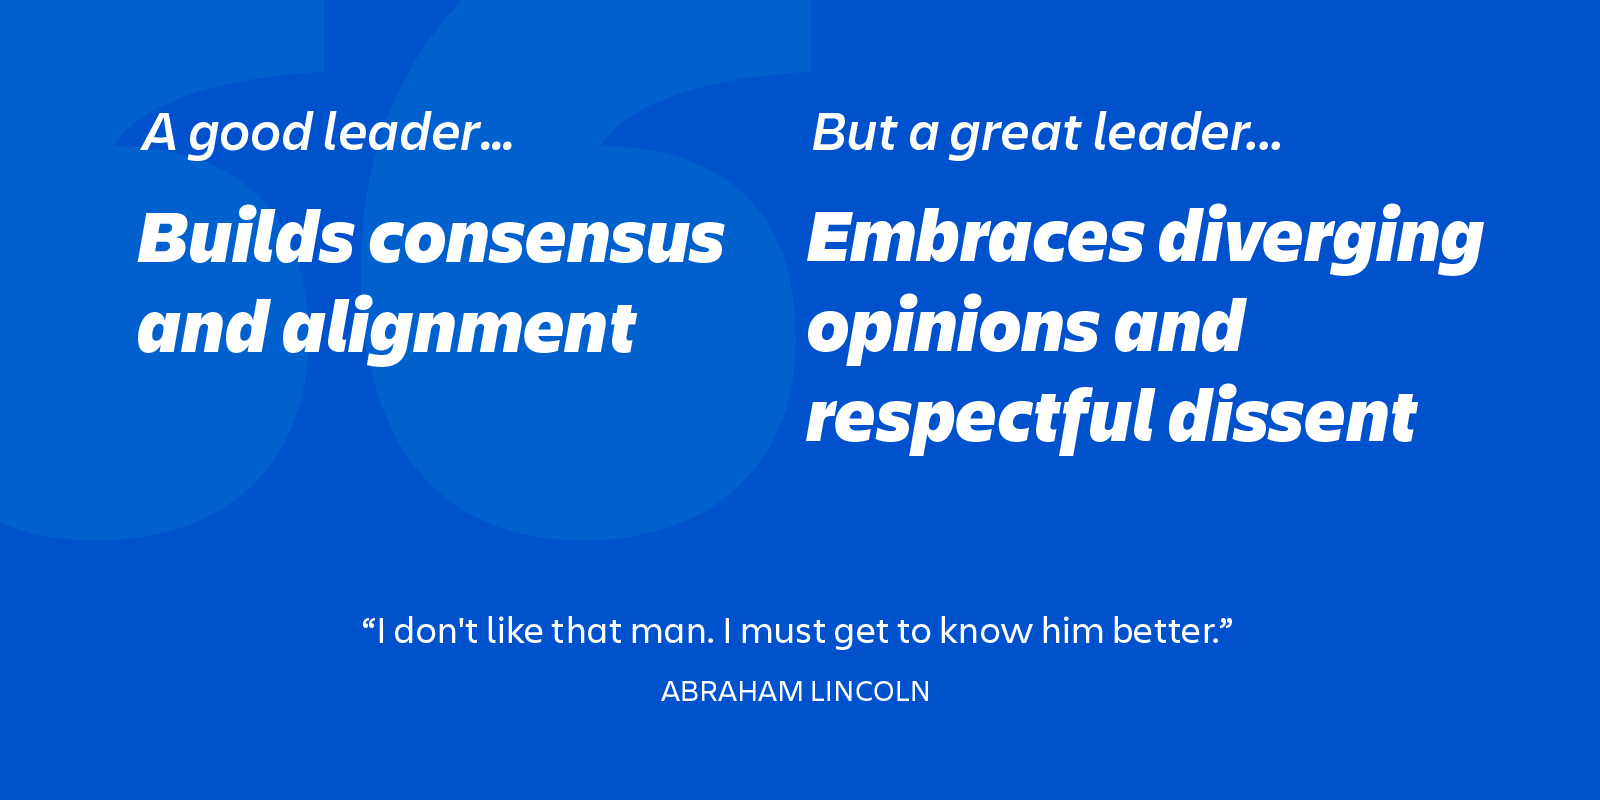 great leaders embrace dissent